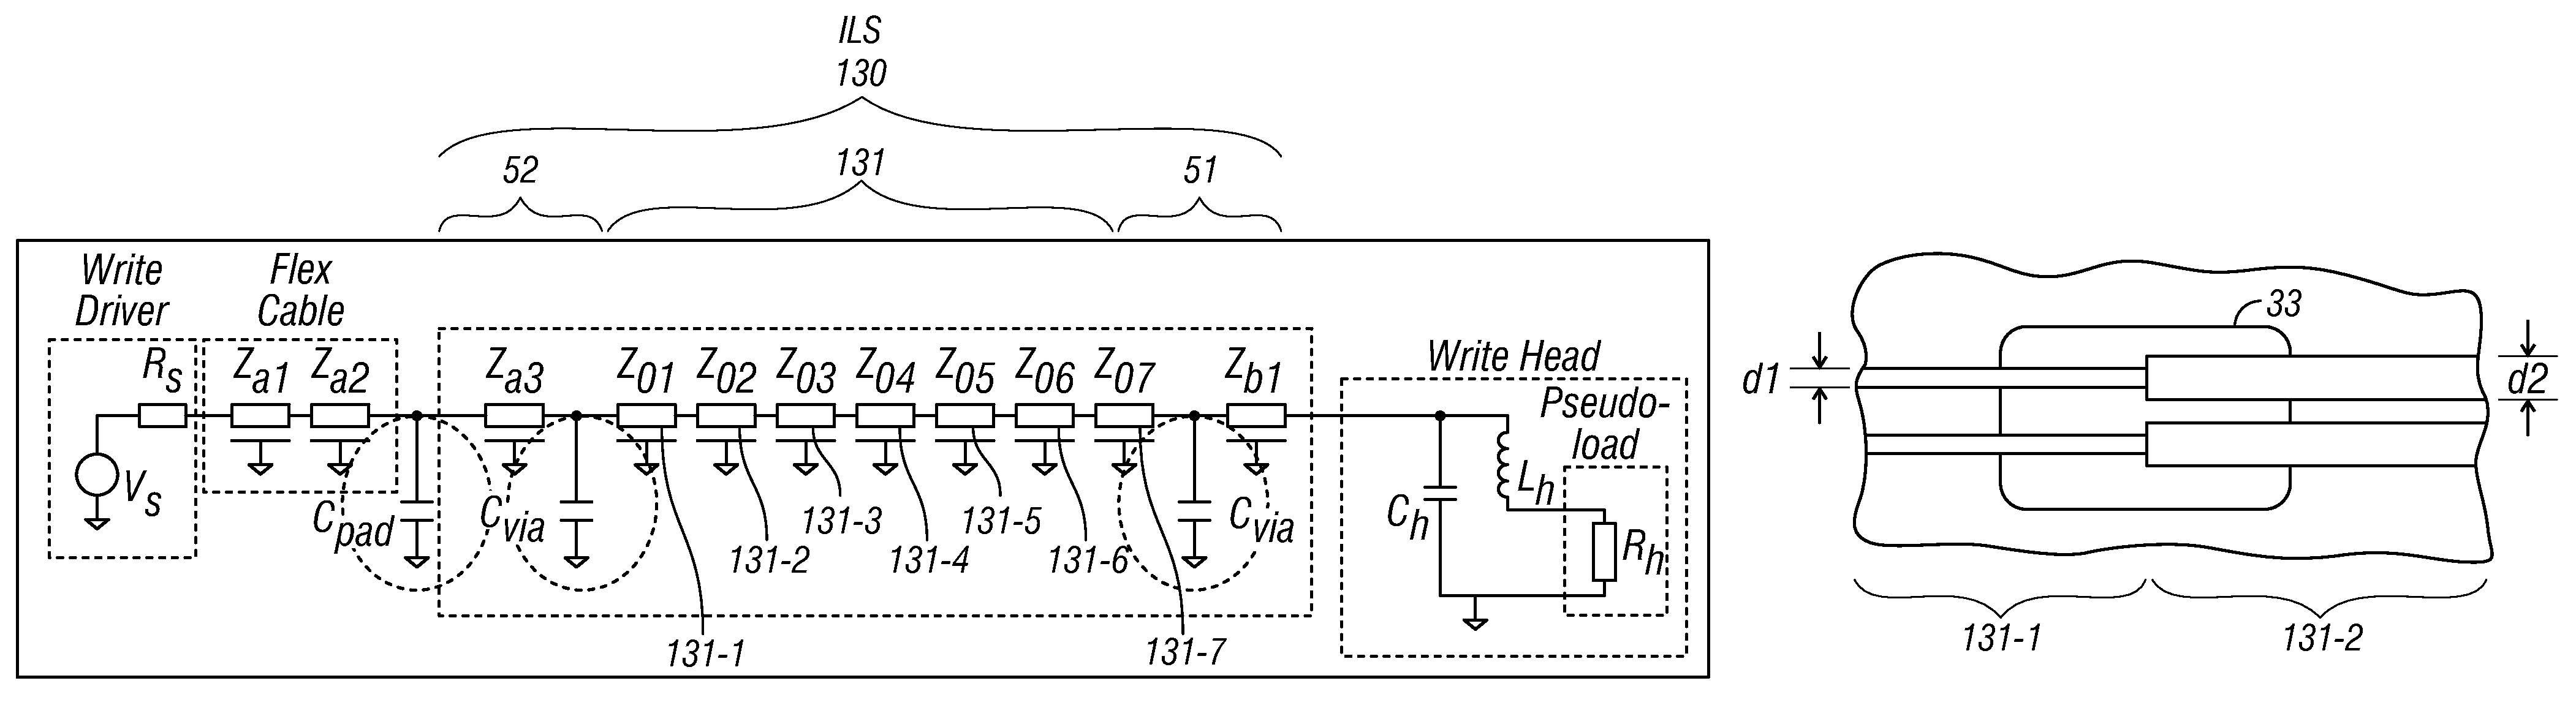 Magnetic recording disk drive with integrated lead suspension having multiple segments for optimal characteristic impedance